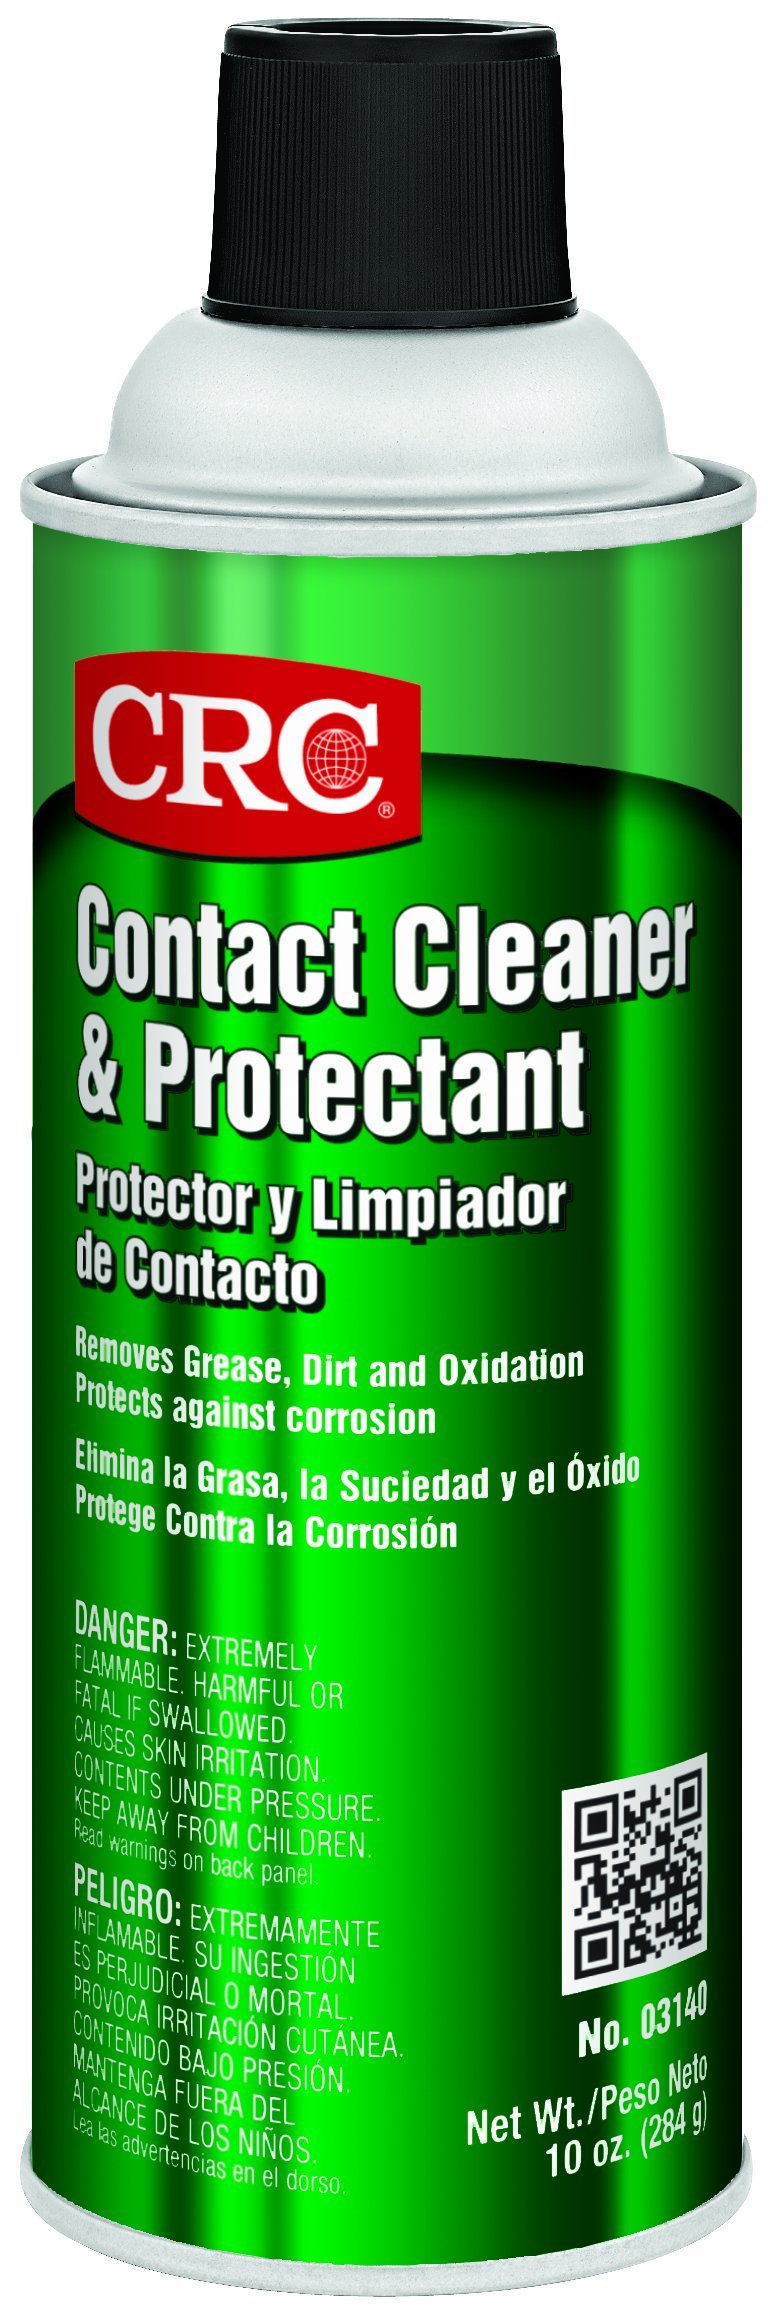 CRC Contact Cleaner and Protectant